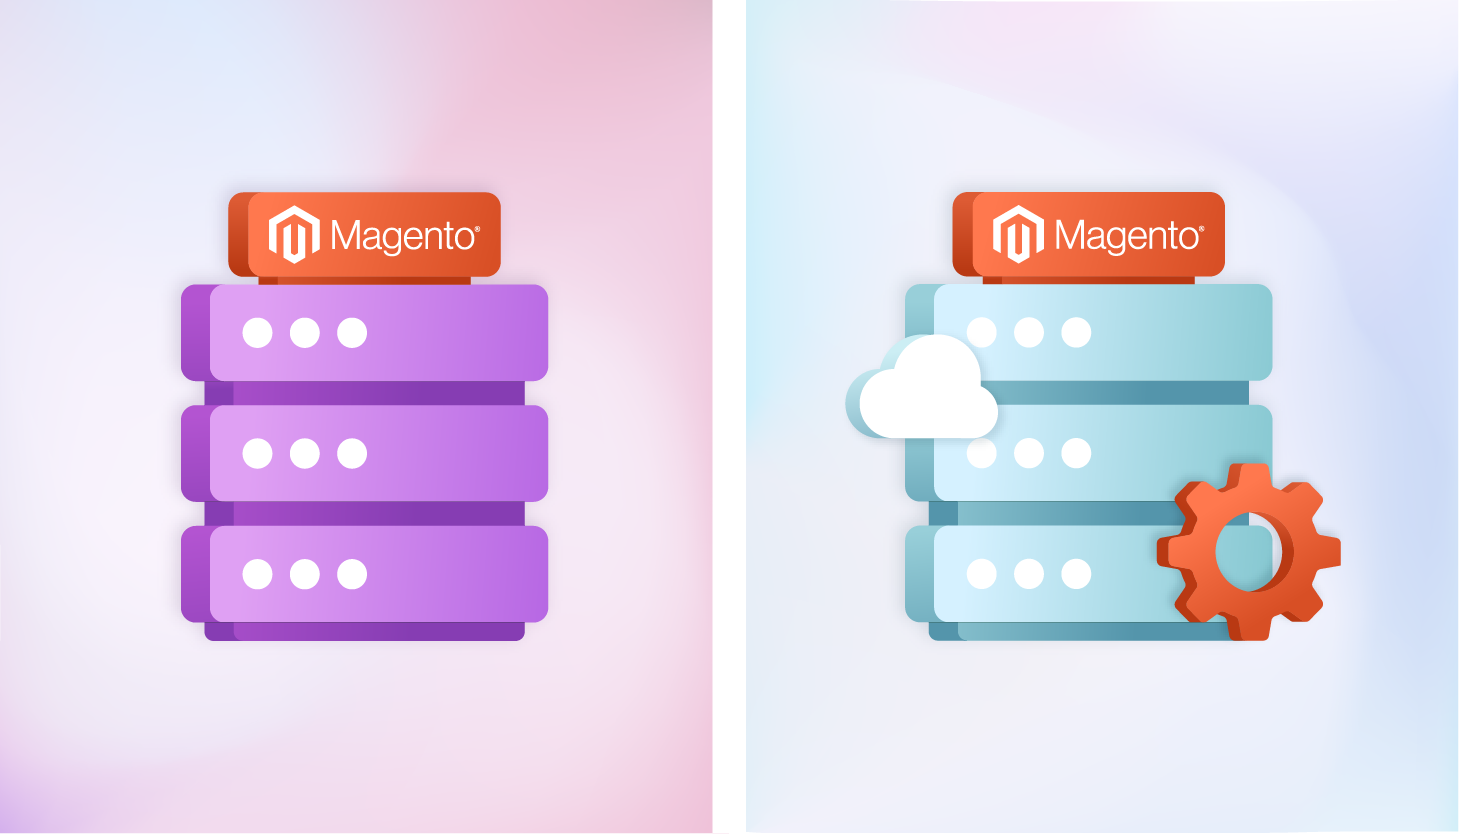 Magento Self-Hosted vs Managed Hosting: Pros and Cons